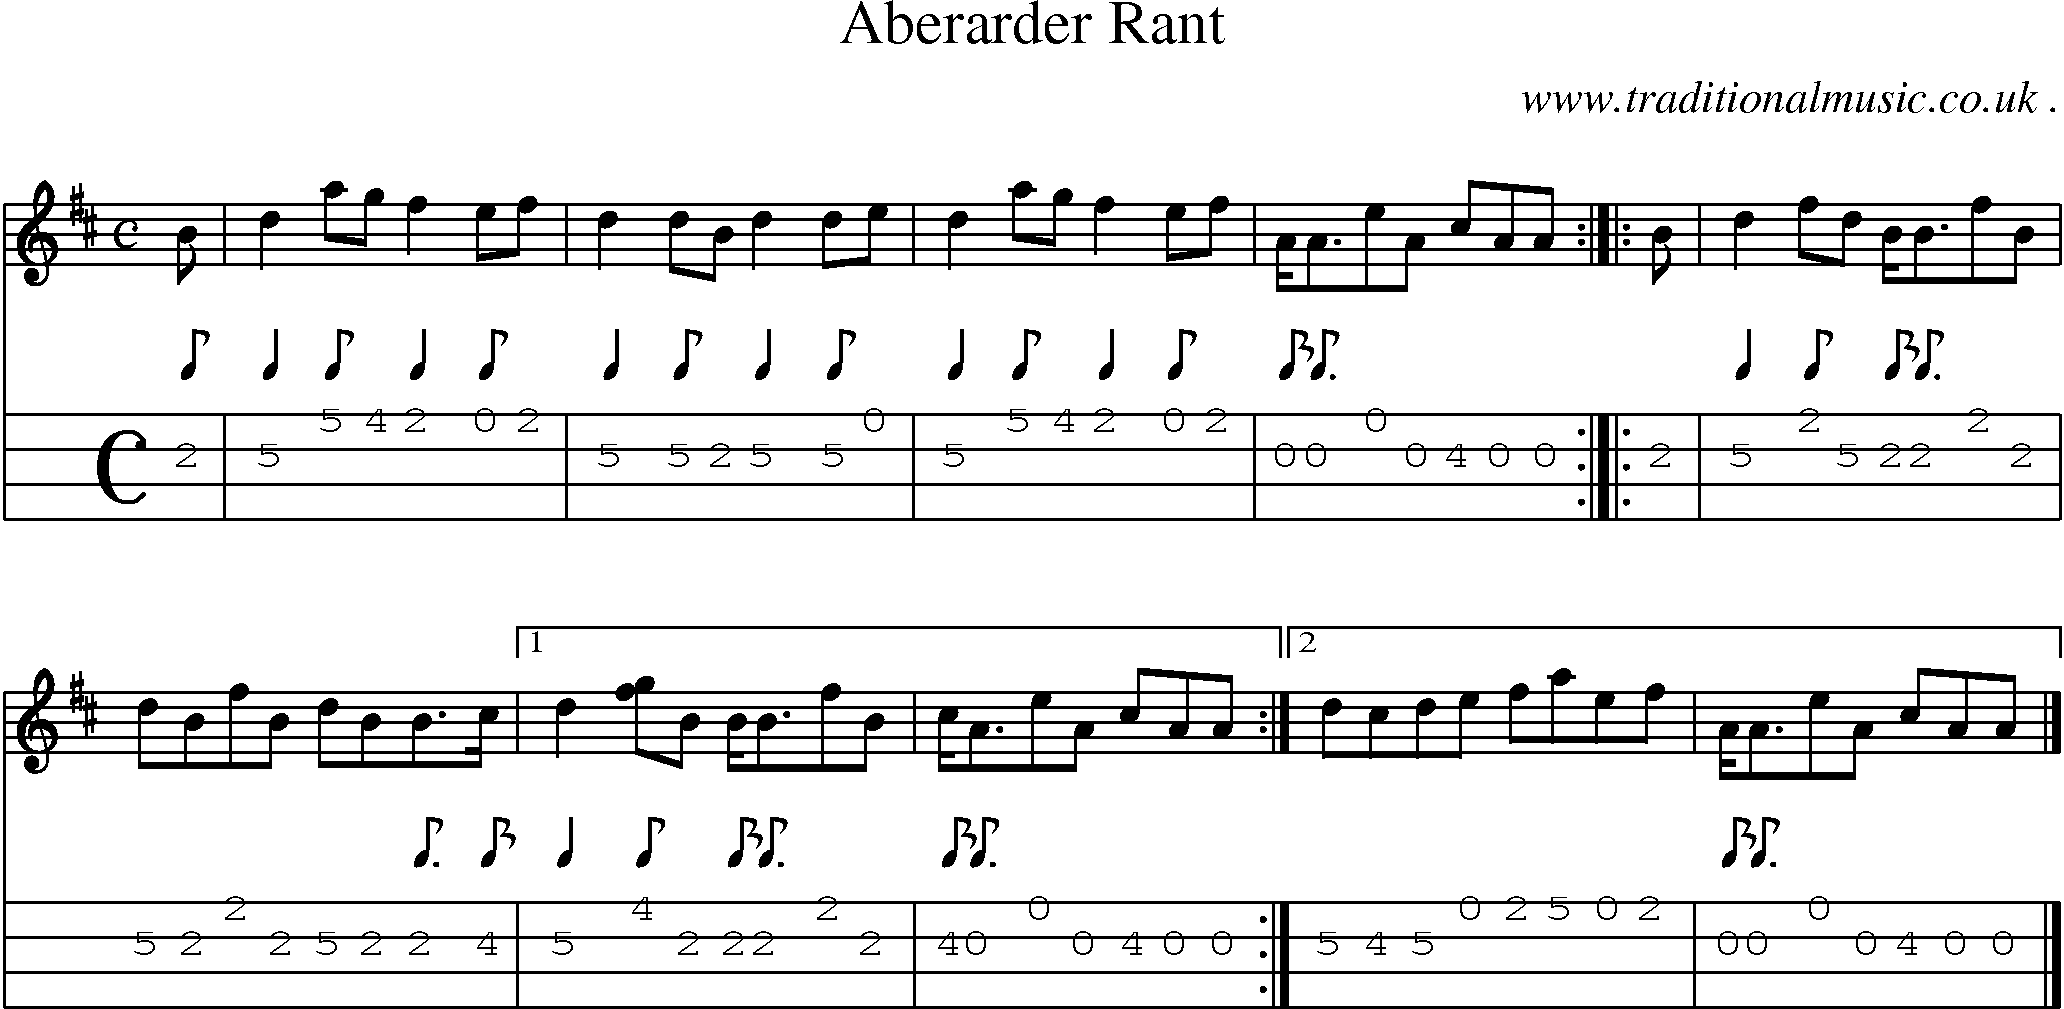 Sheet-music  score, Chords and Mandolin Tabs for Aberarder Rant